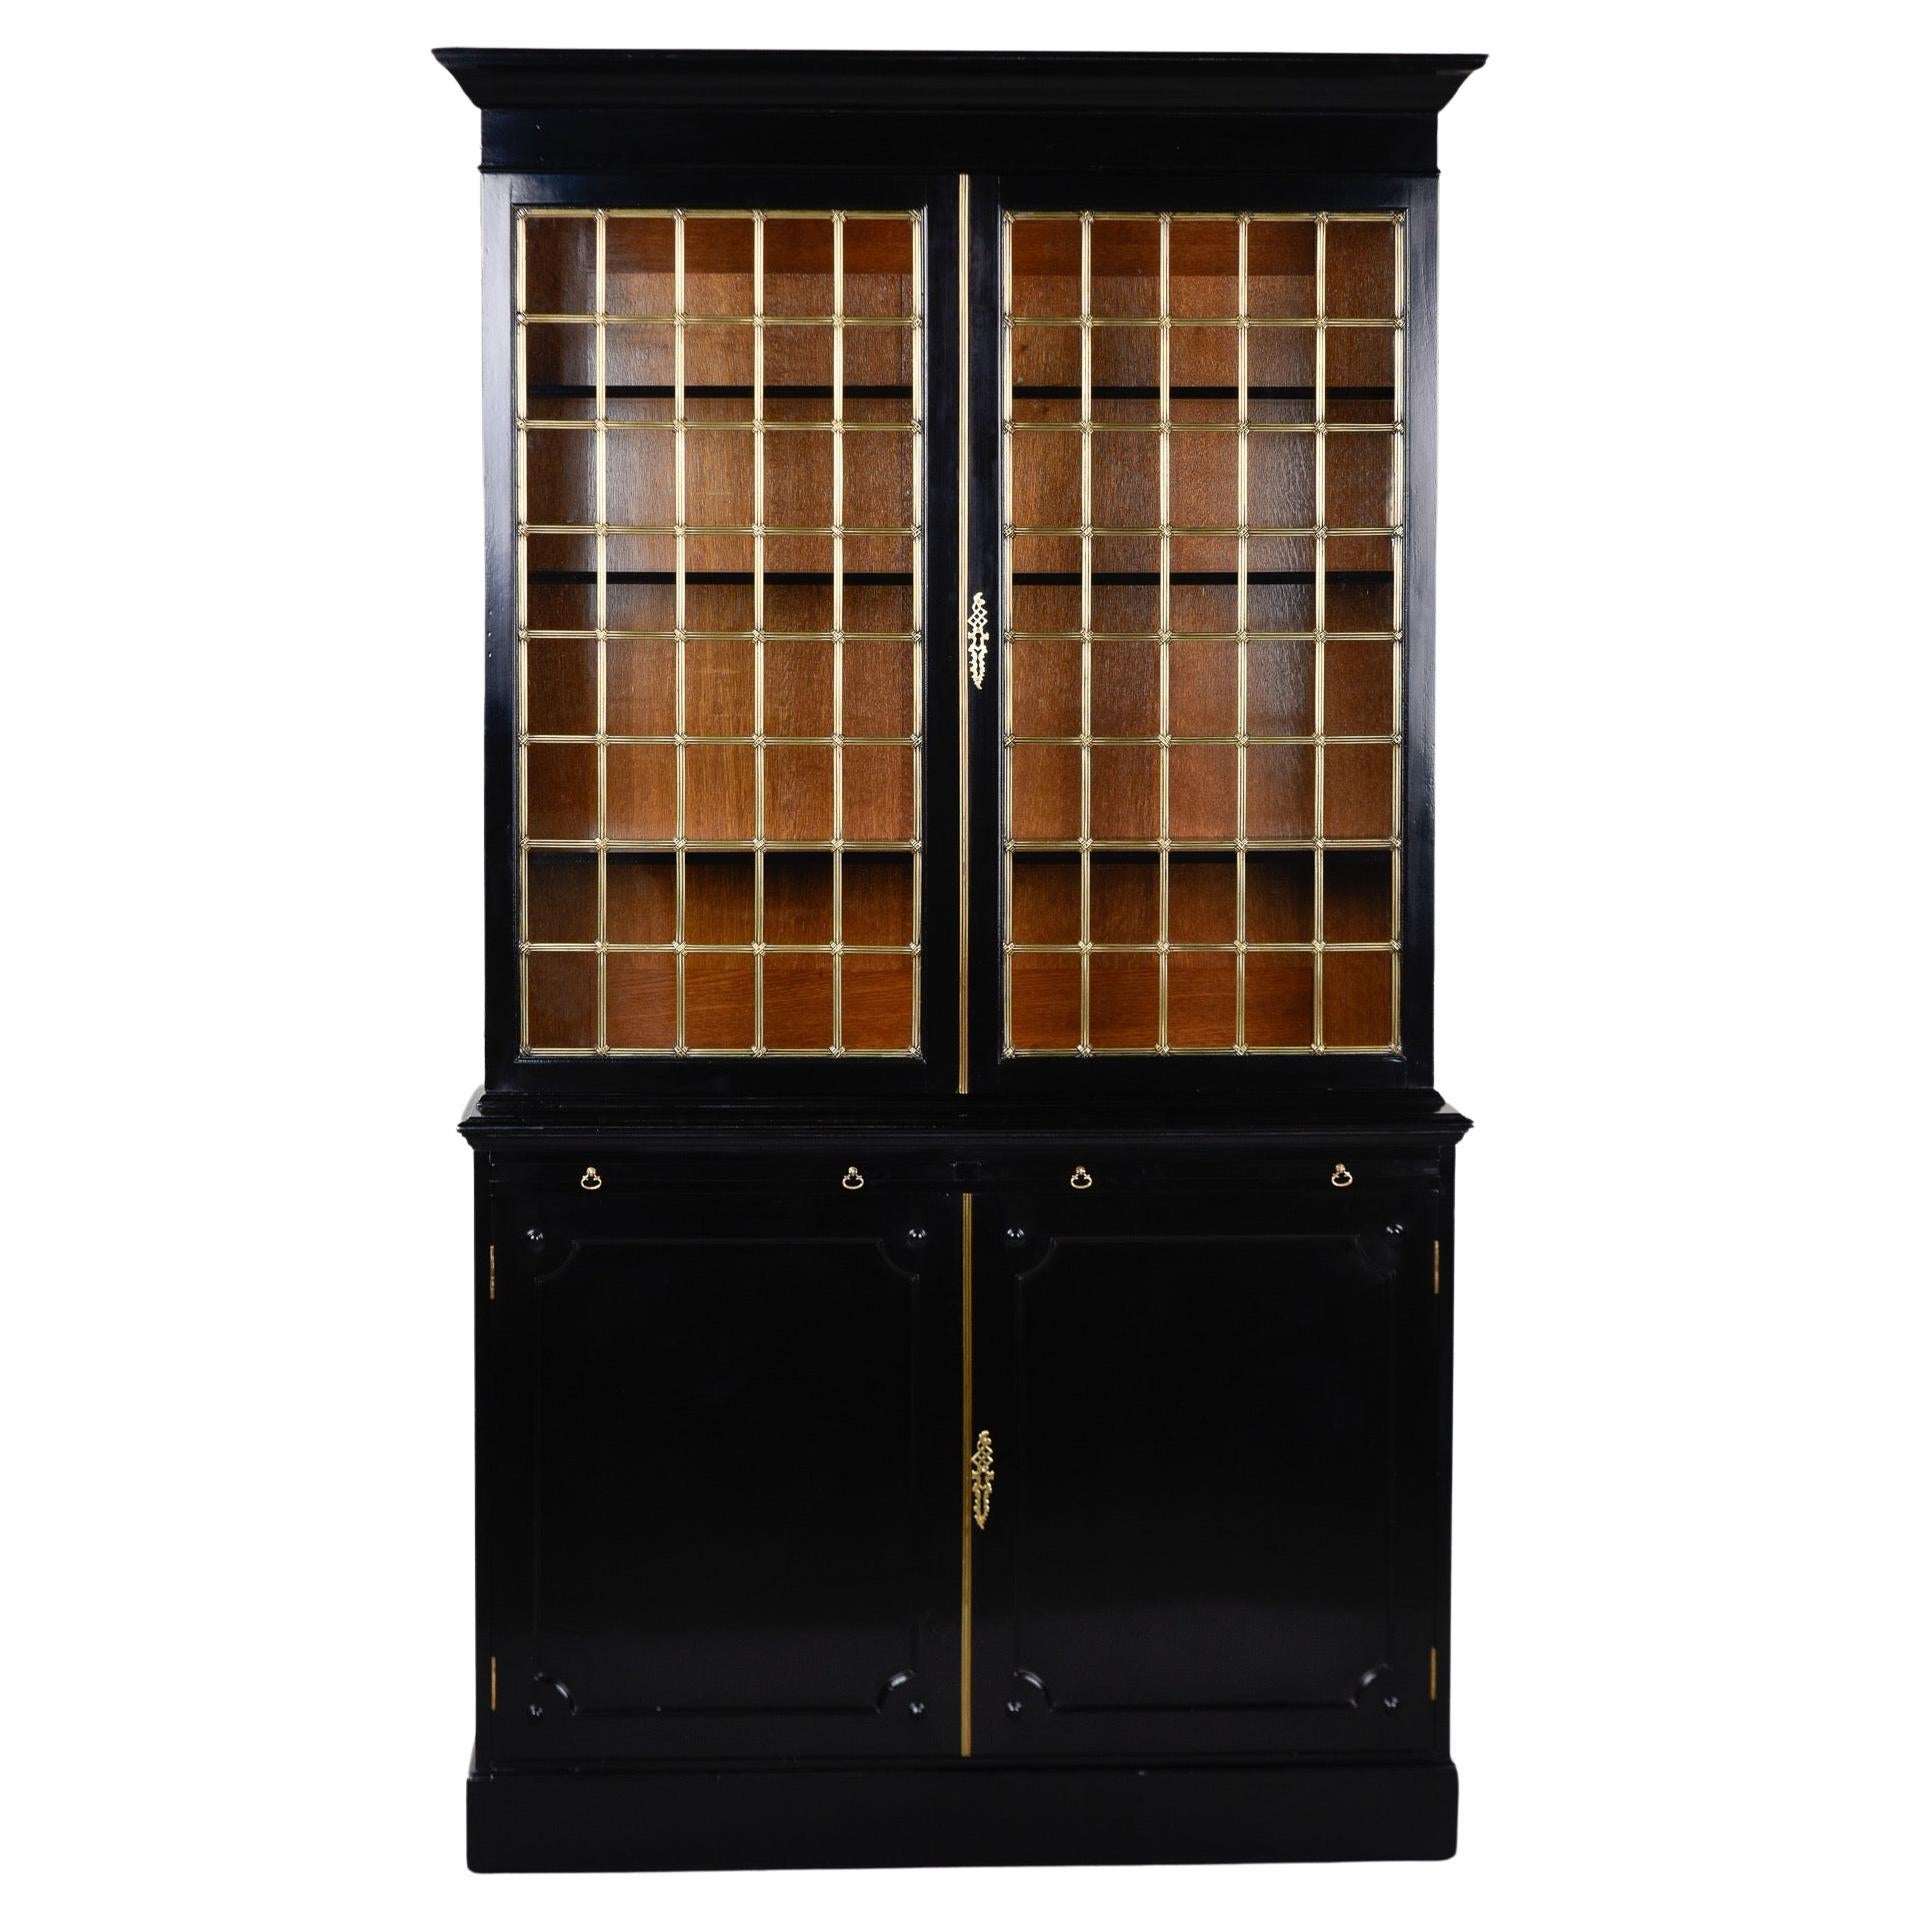 Early 20th C English Ebonised Mahogany Bookcase with Brass Grill & Leaded Glass